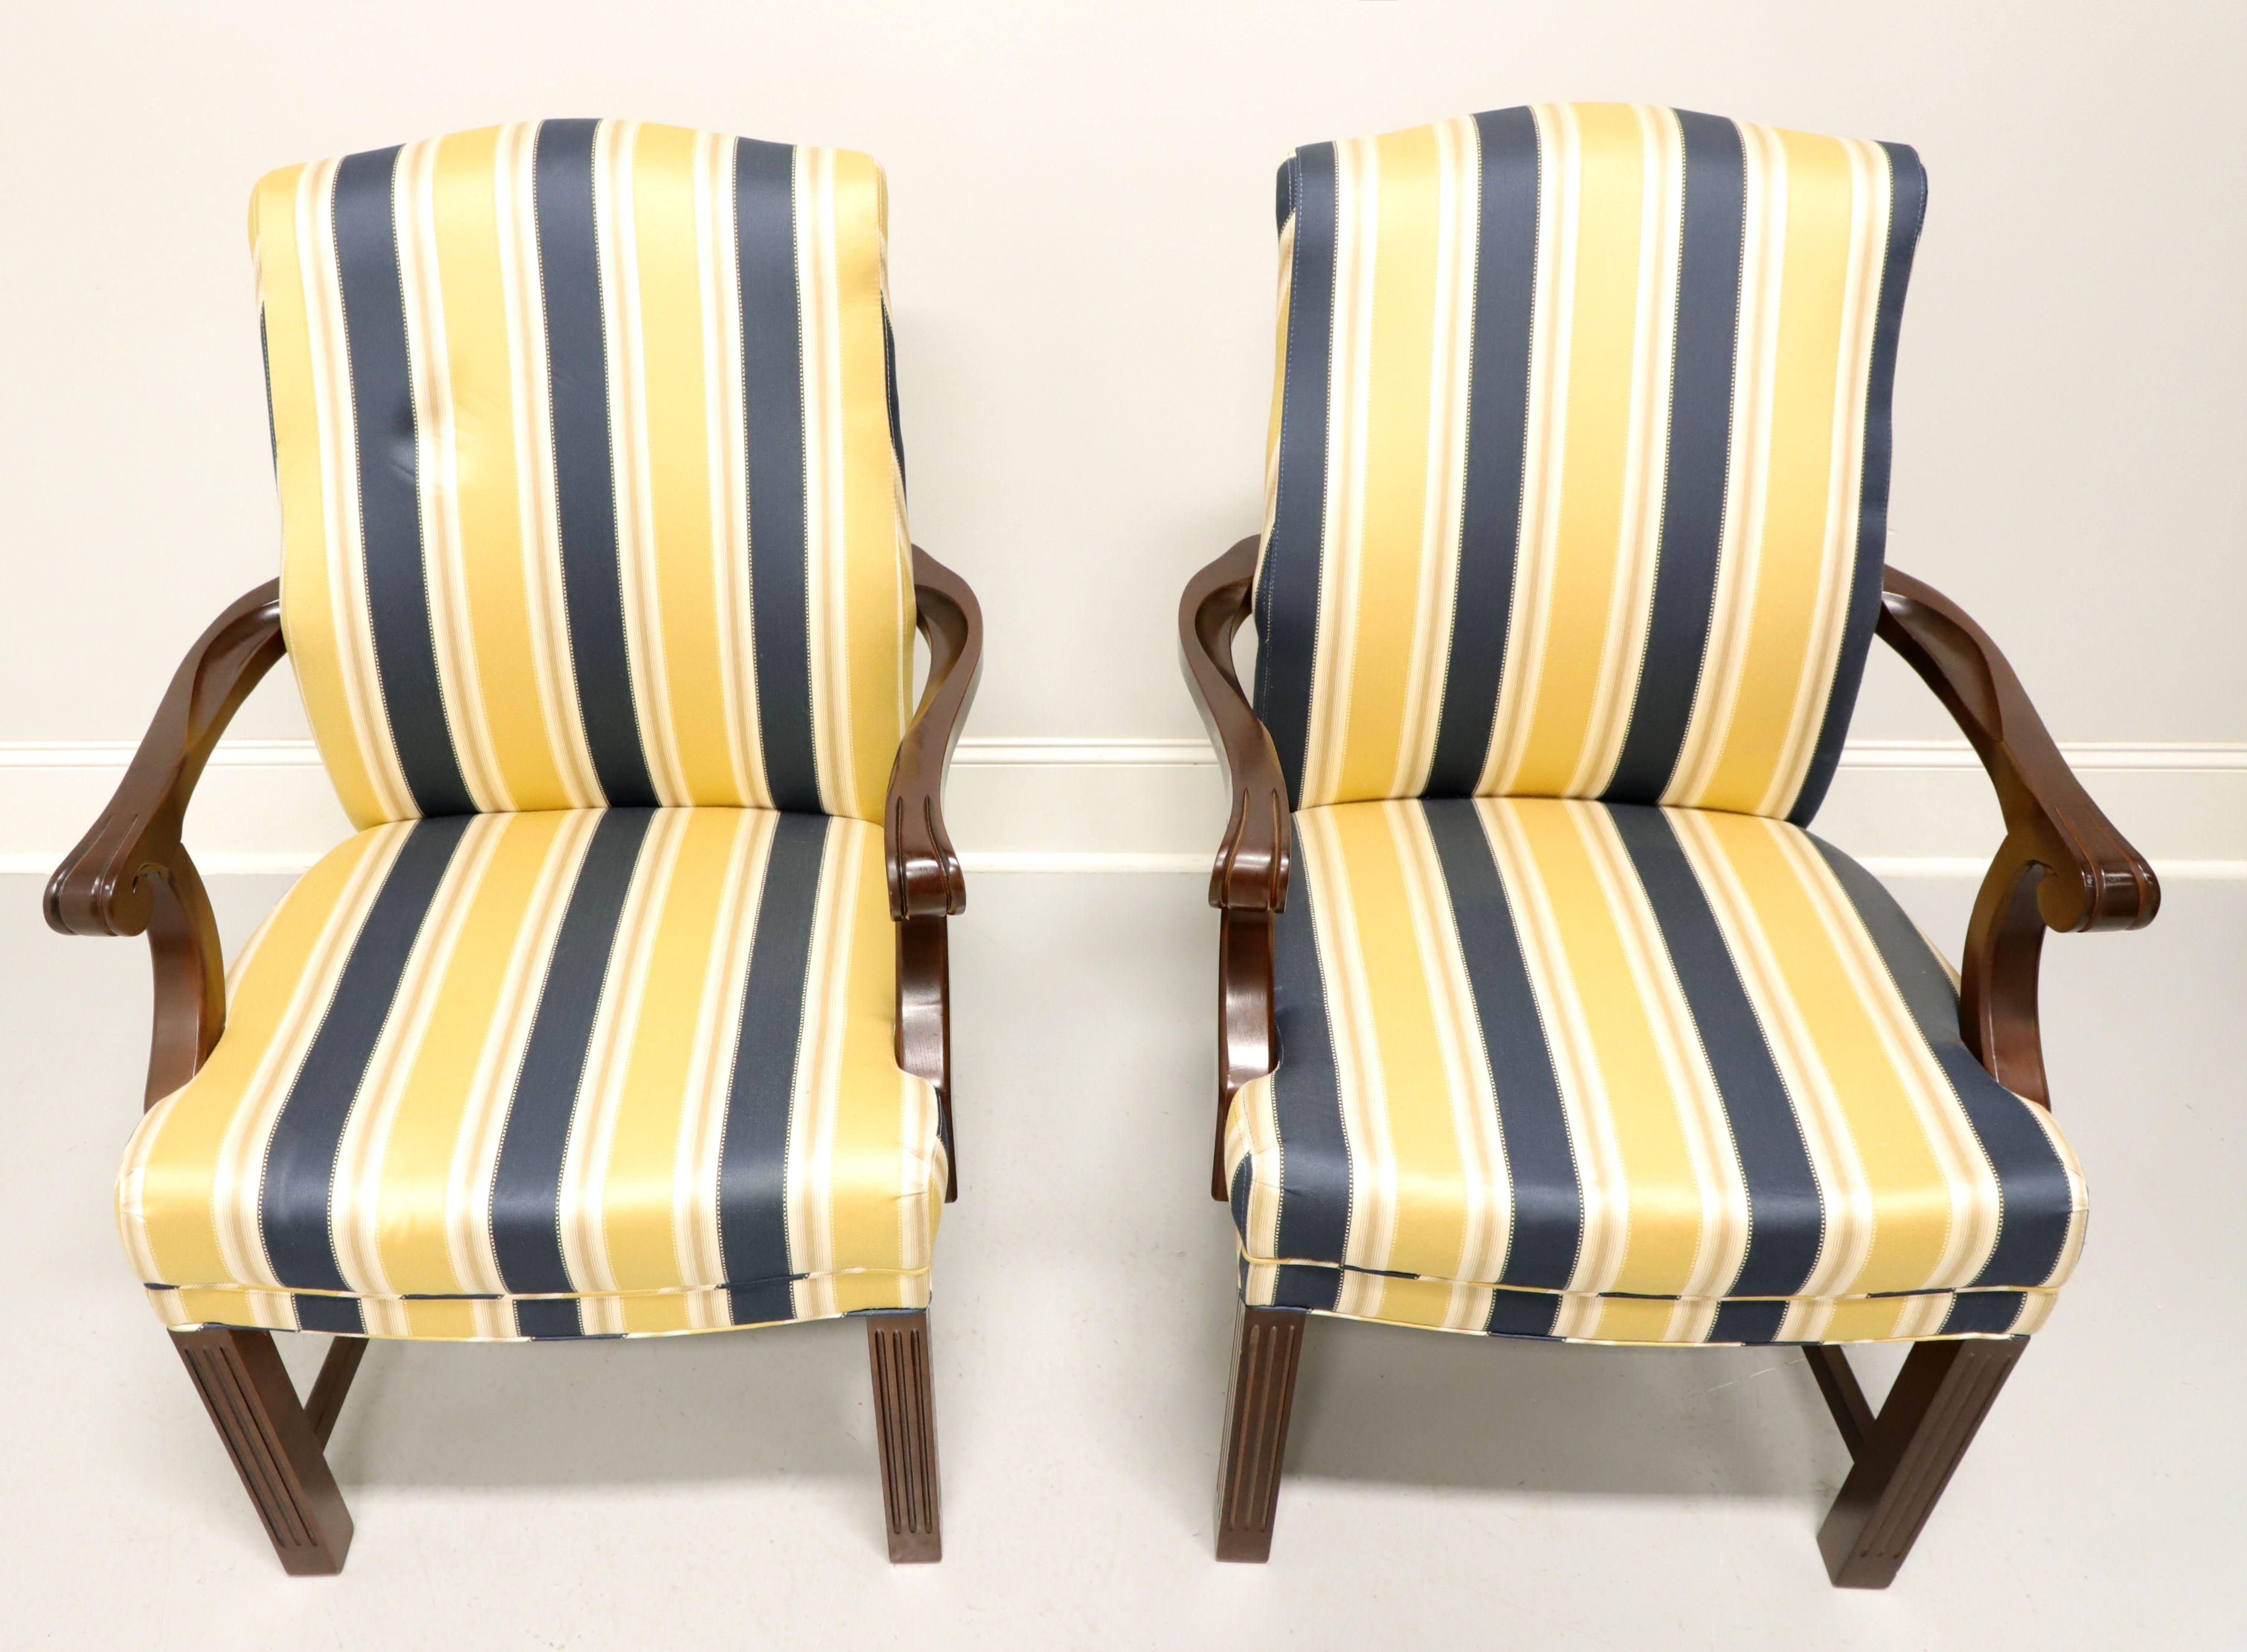 A pair of Chippendale style upholstered armchairs by Patrician Furniture. Navy blue, yellow and white striped fabric upholstery on a mahogany frame with straight legs and stretcher base. Made in High Point, North Carolina, USA, in the late 20th